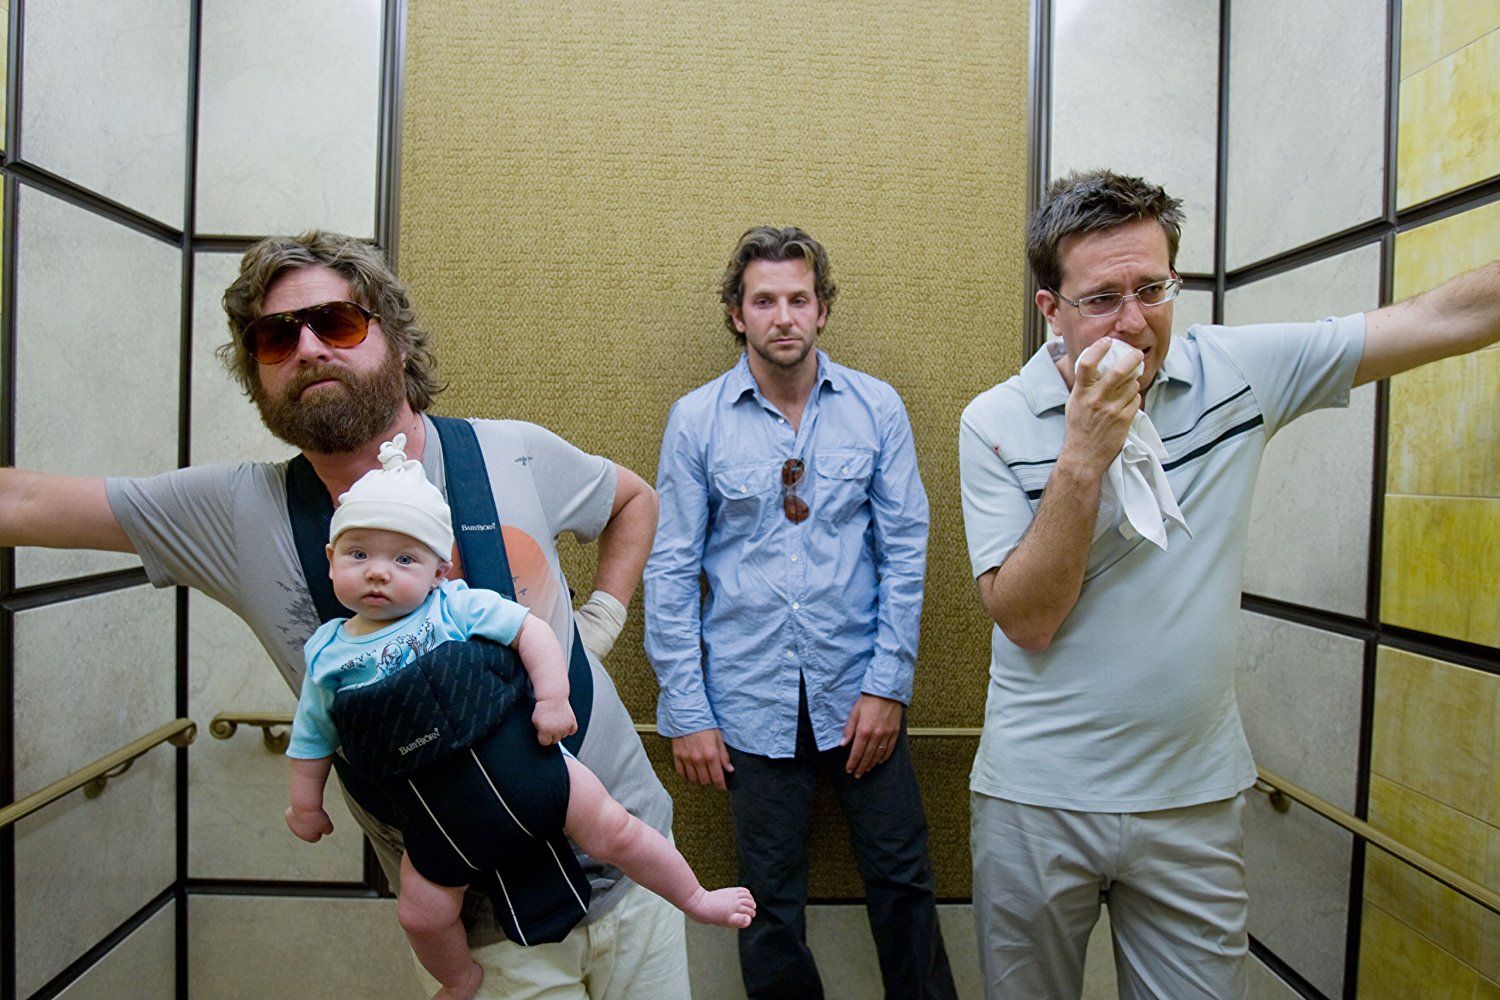 12 Guys Explain What Really Happens At a Bachelor Party